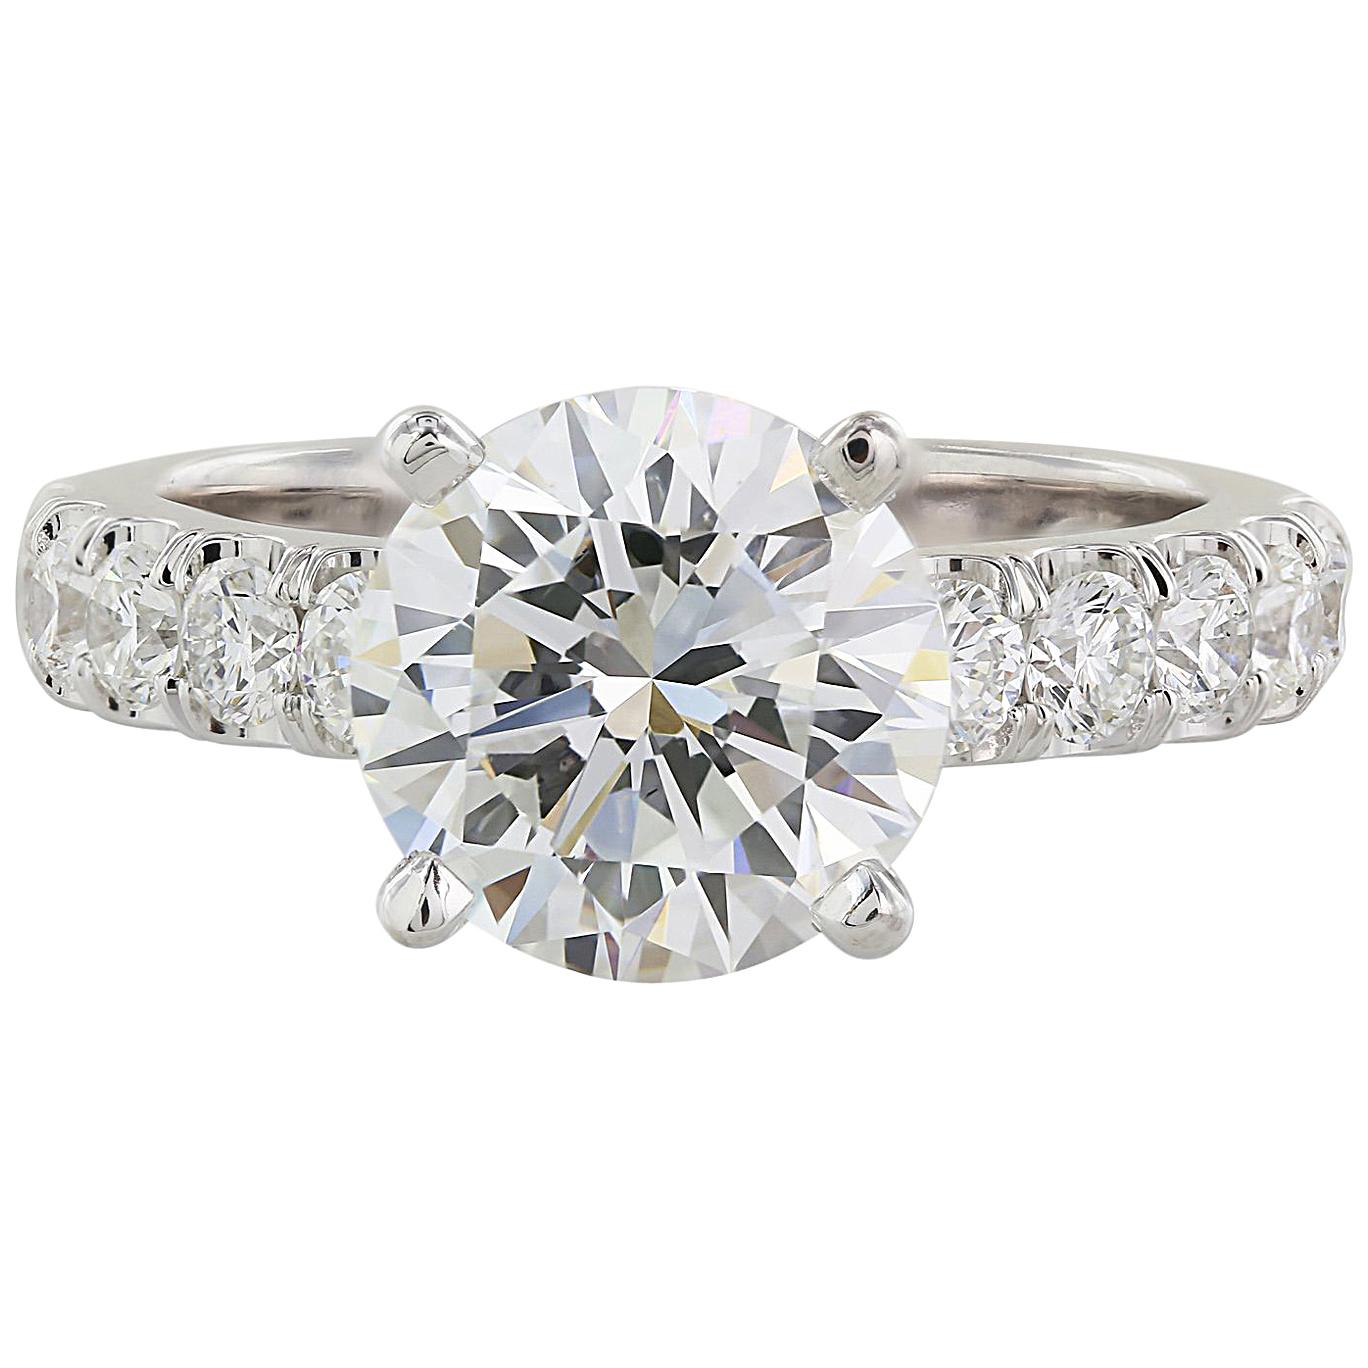 3.03 Carat GIA Certified Diamond Engagement Ring For Sale